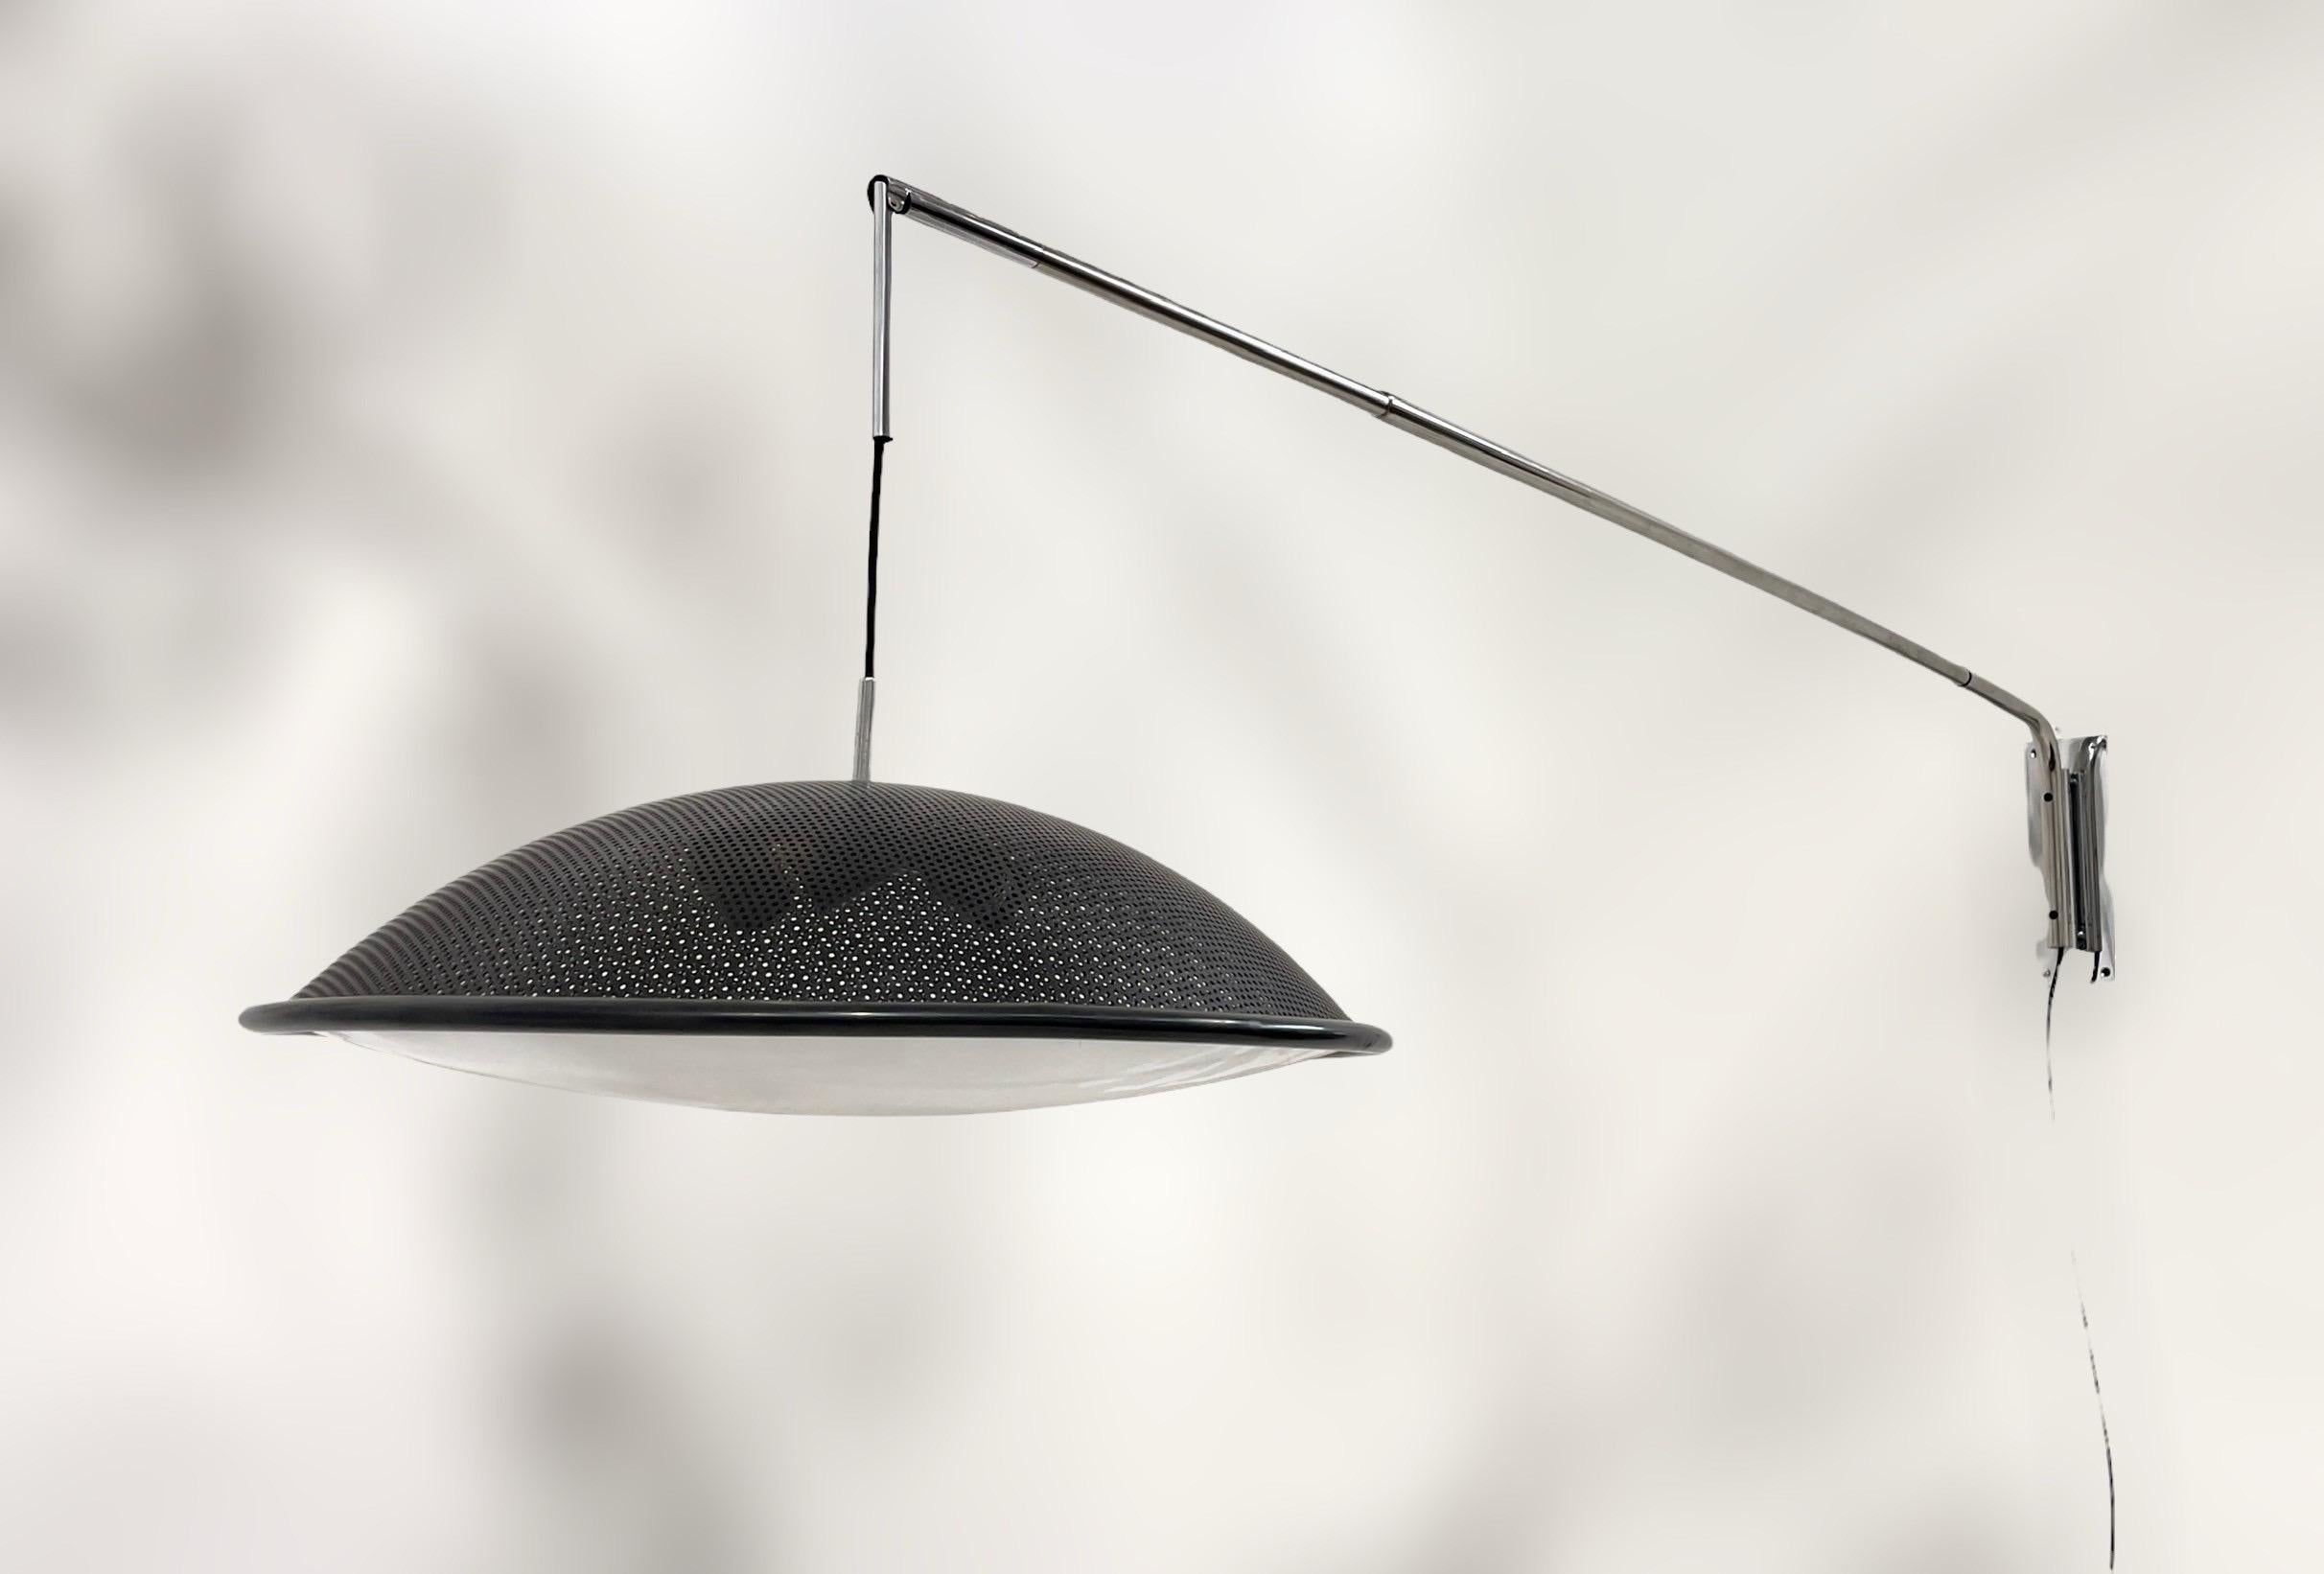 Extendable wall lamp in chrome-plated metal, painted iron with perspex diffuser designed by Franco Mirenzi and produced by Valenti, 1970s.
Max. length 300 cm (118